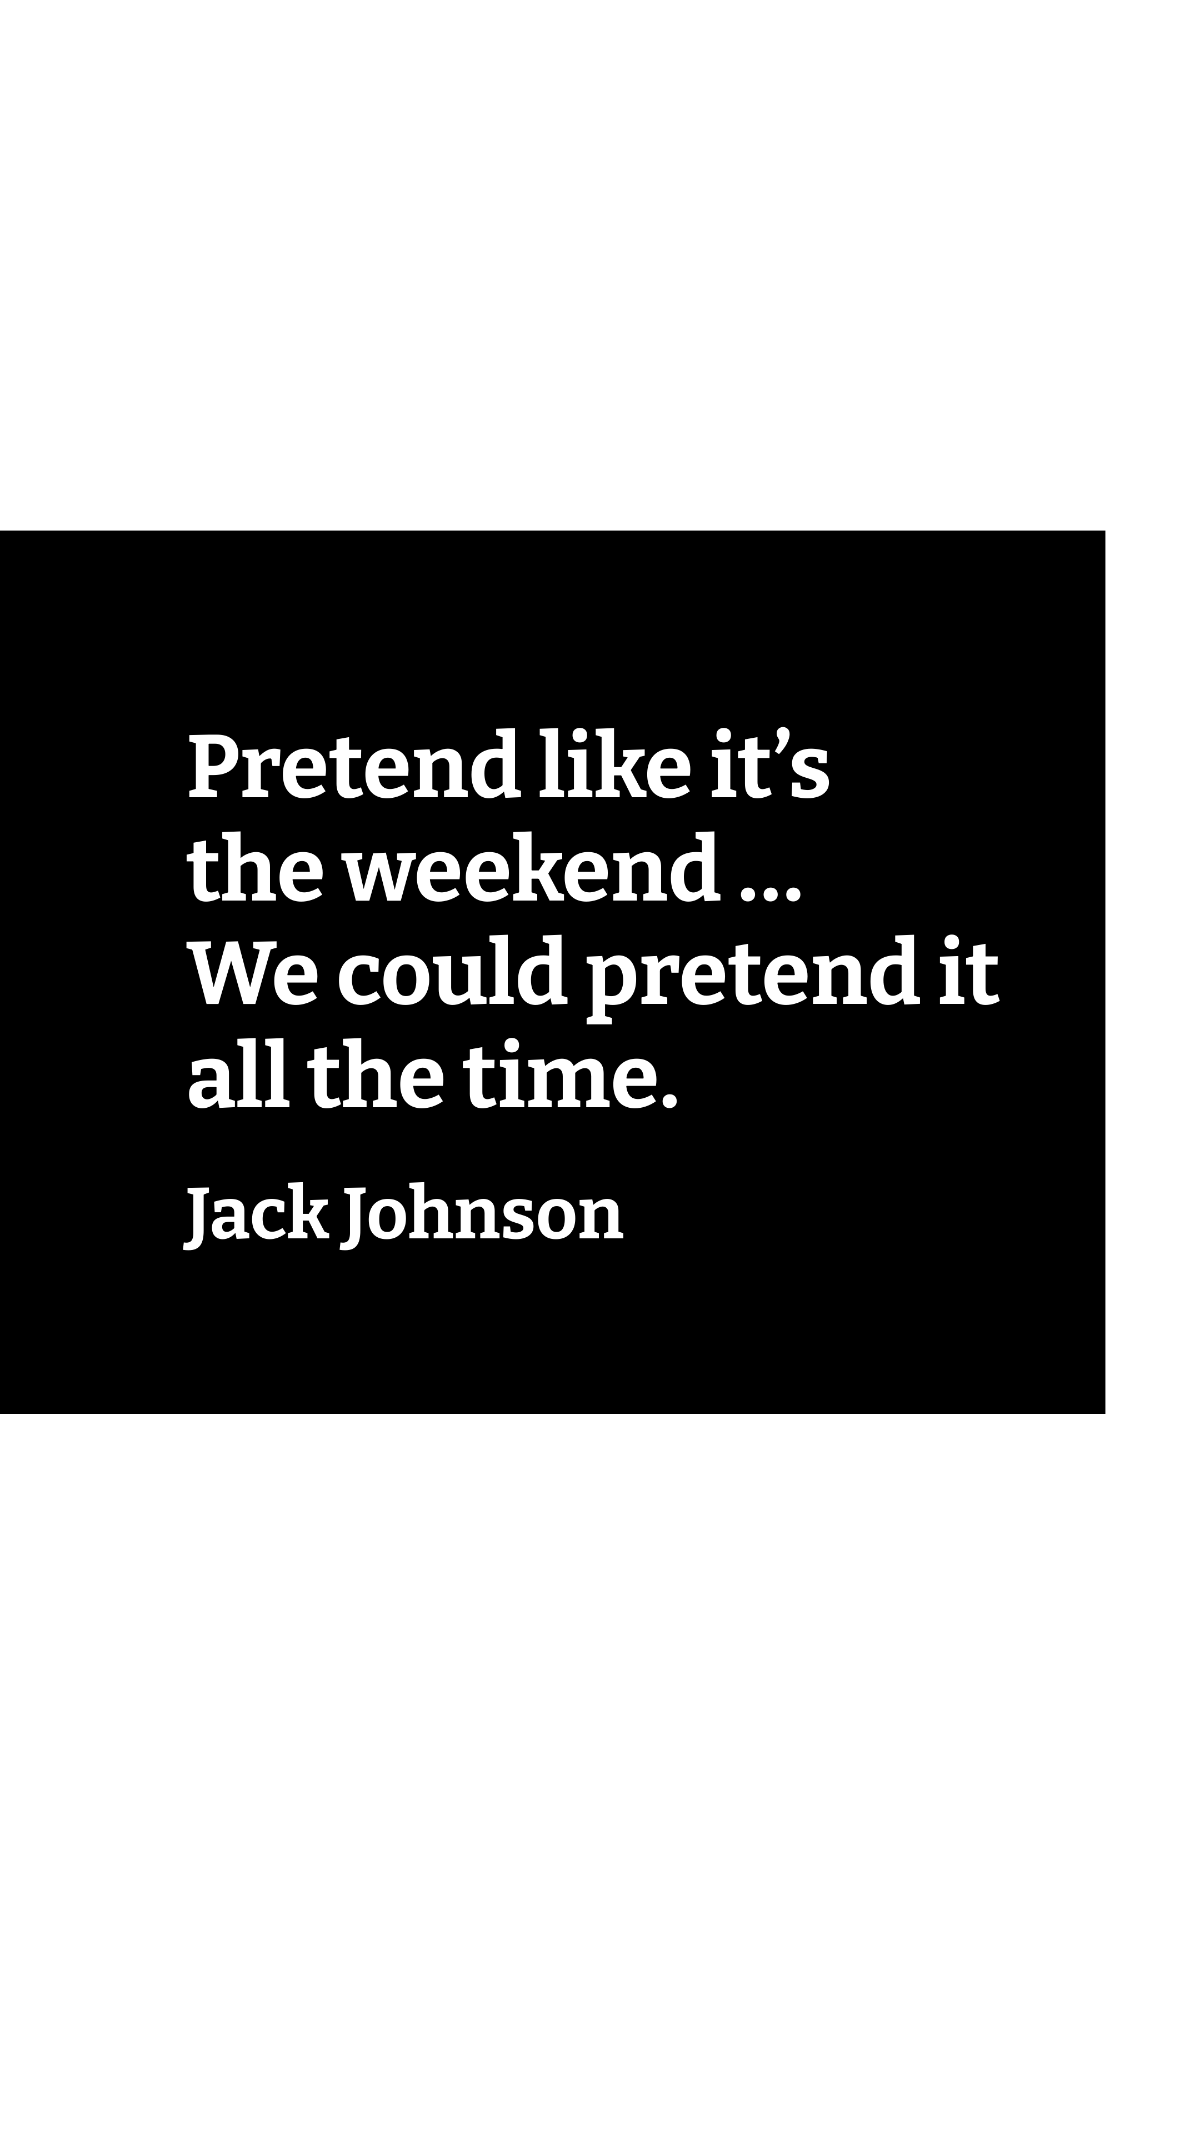 Jack Johnson - Pretend like it’s the weekend … We could pretend it all the time.  Template